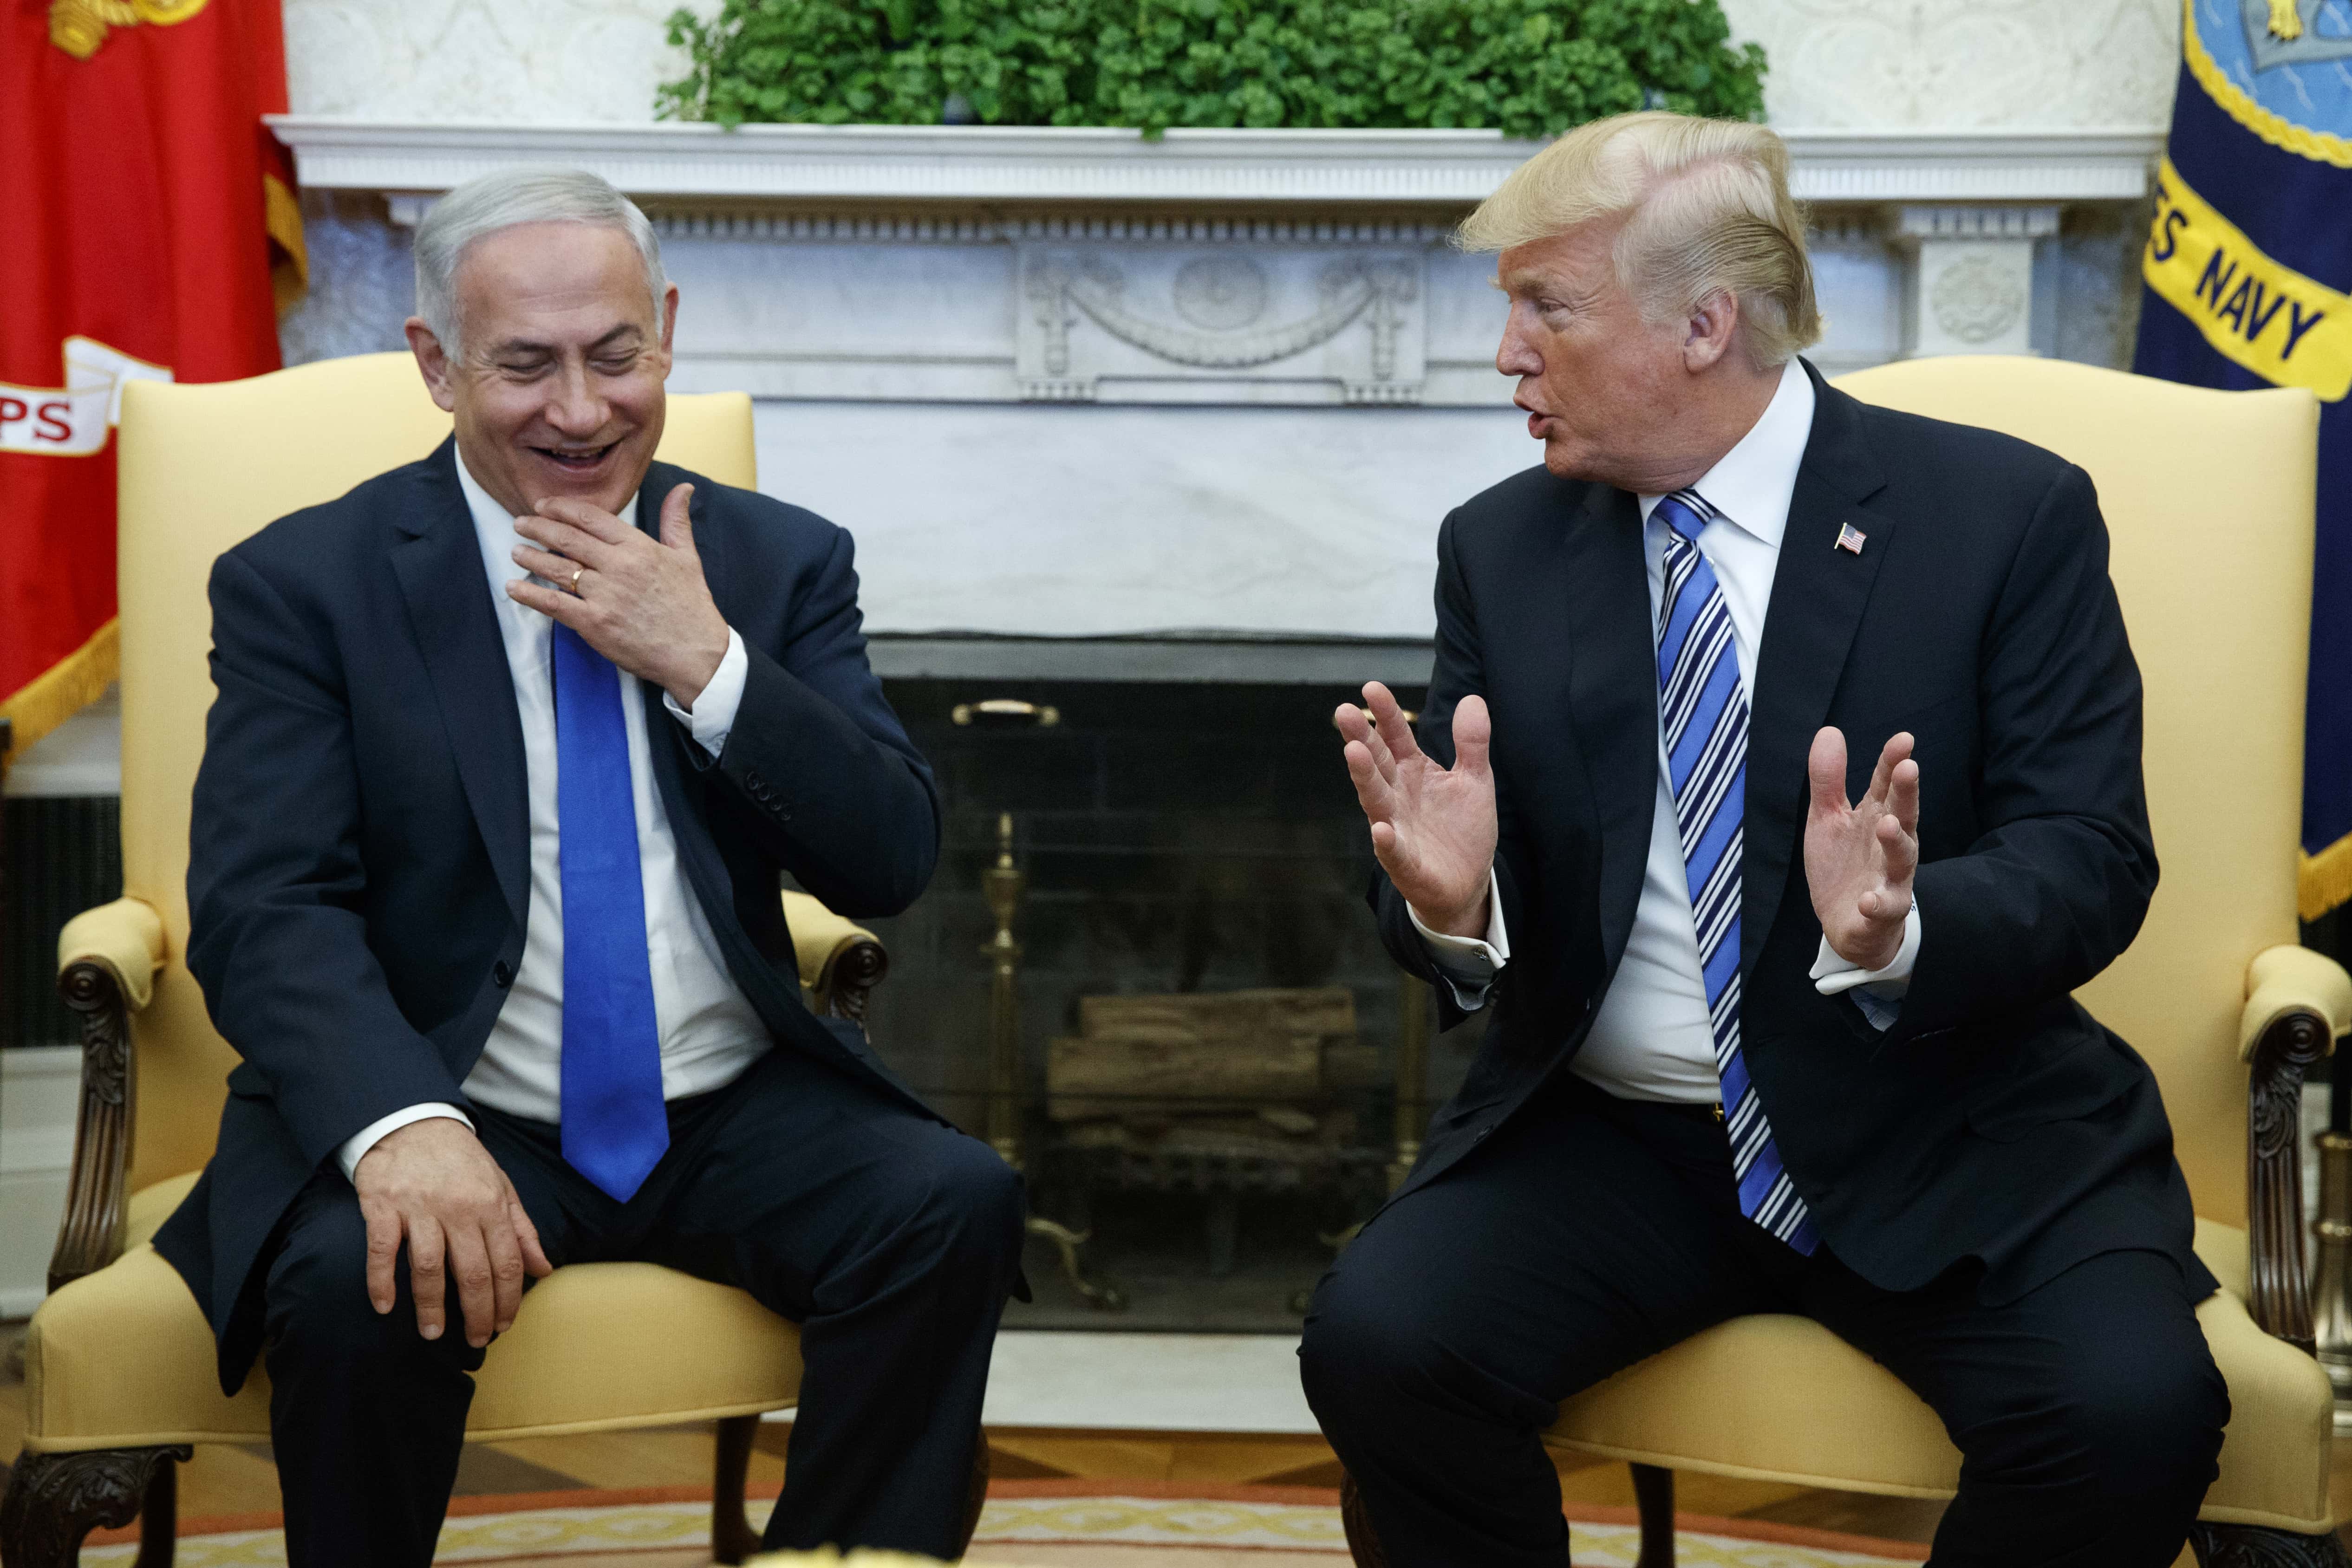 interview-everything-surrounding-the-talks-between-netanyahu-and-trump